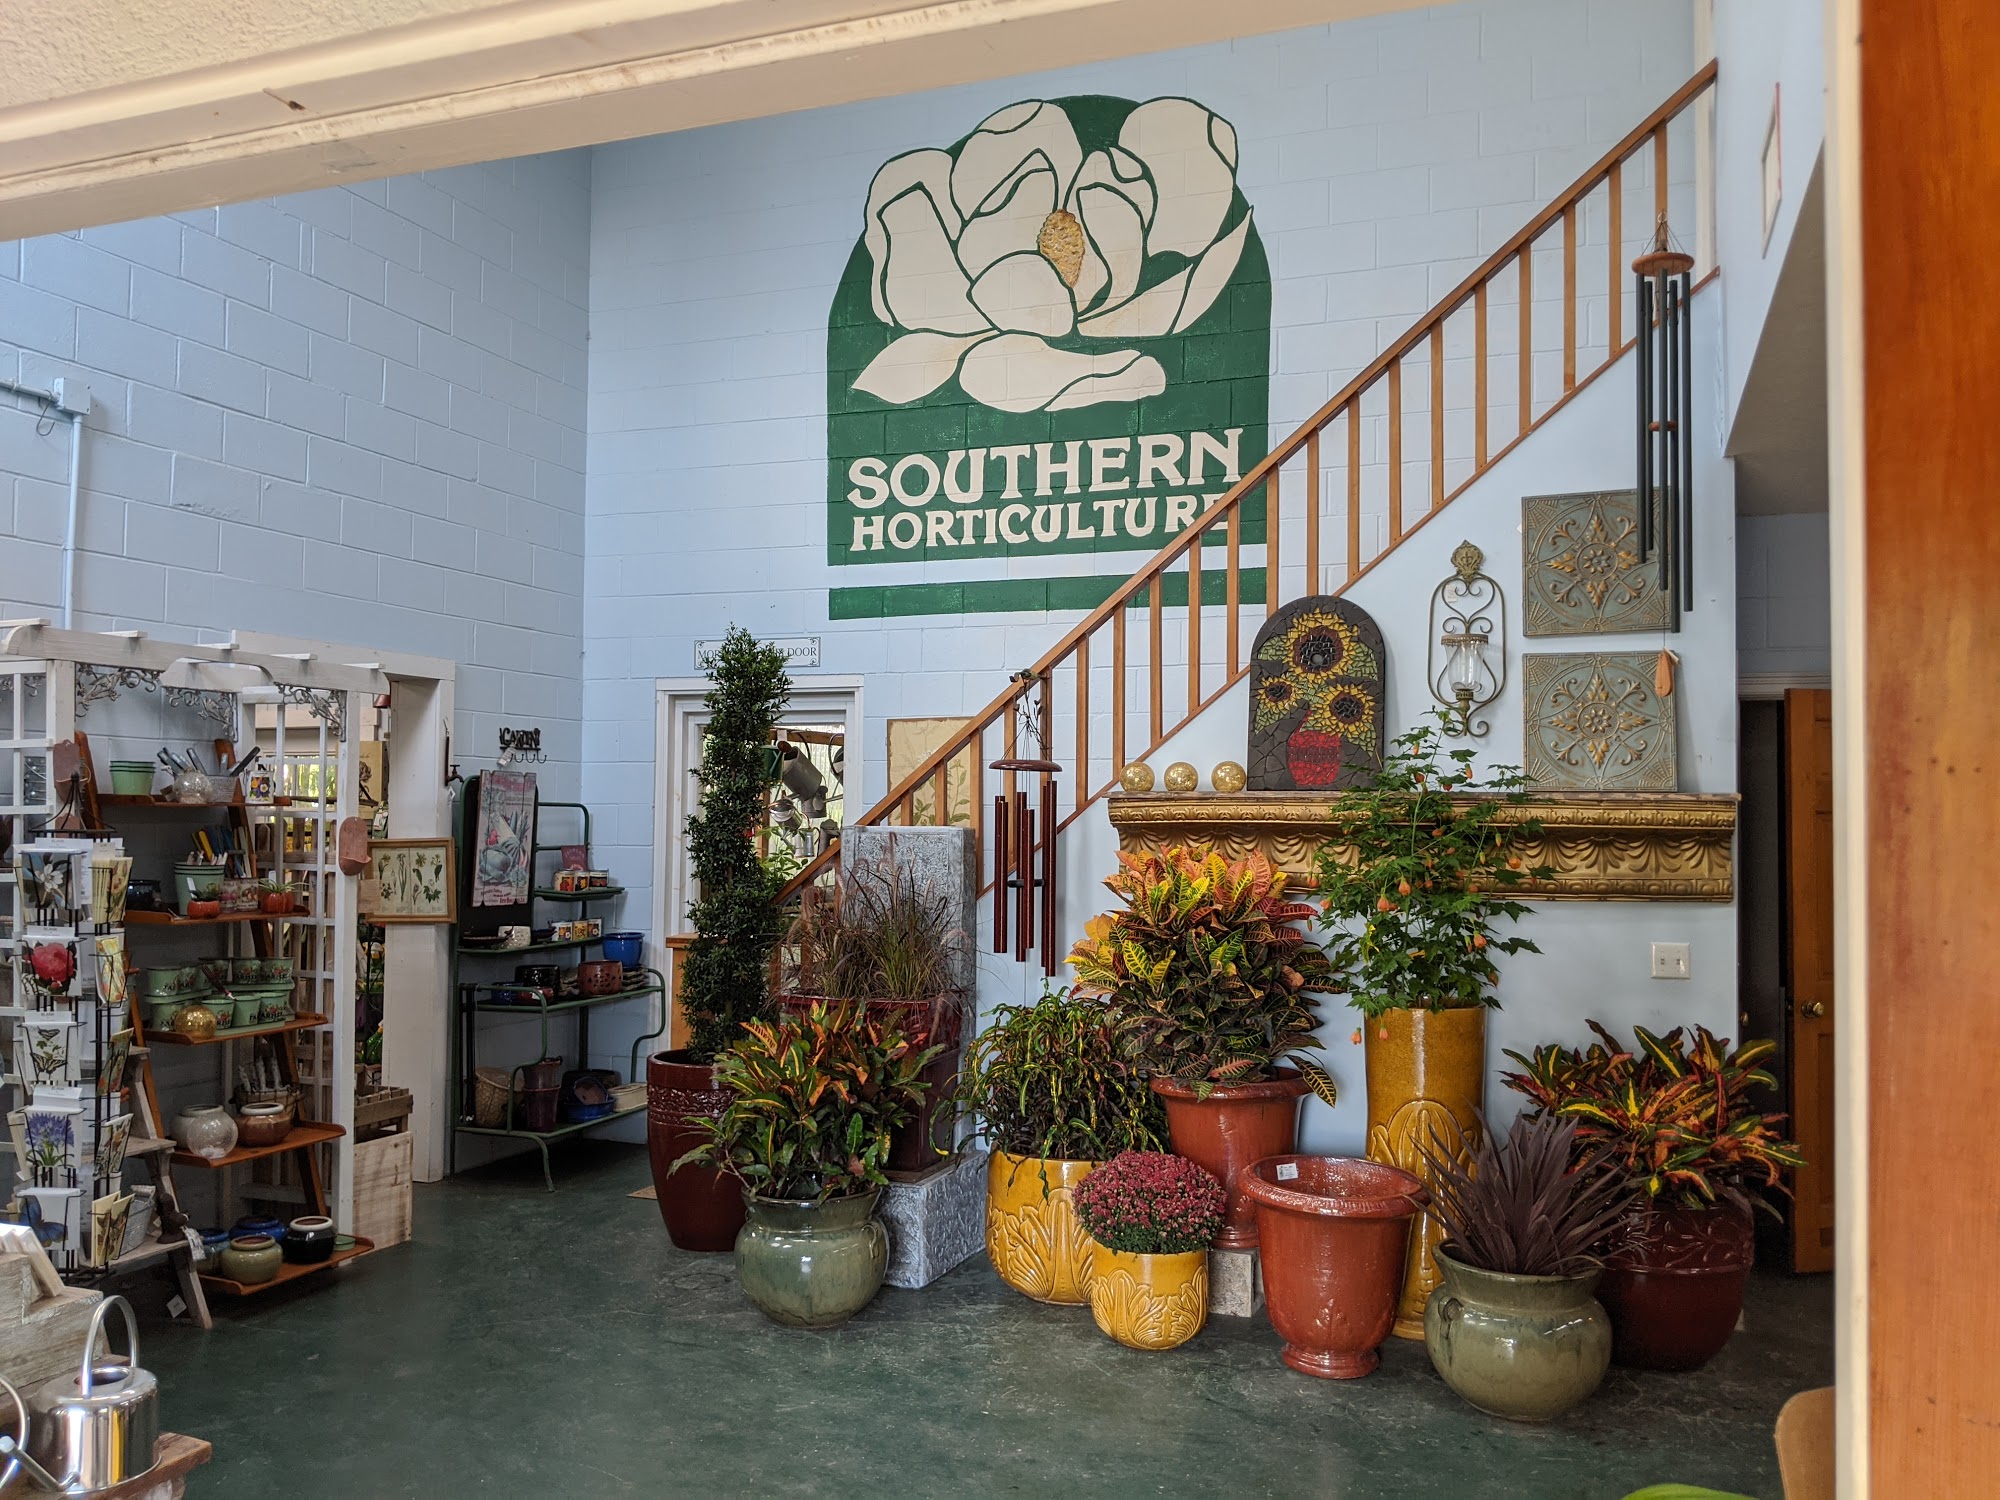 Southern Horticulture